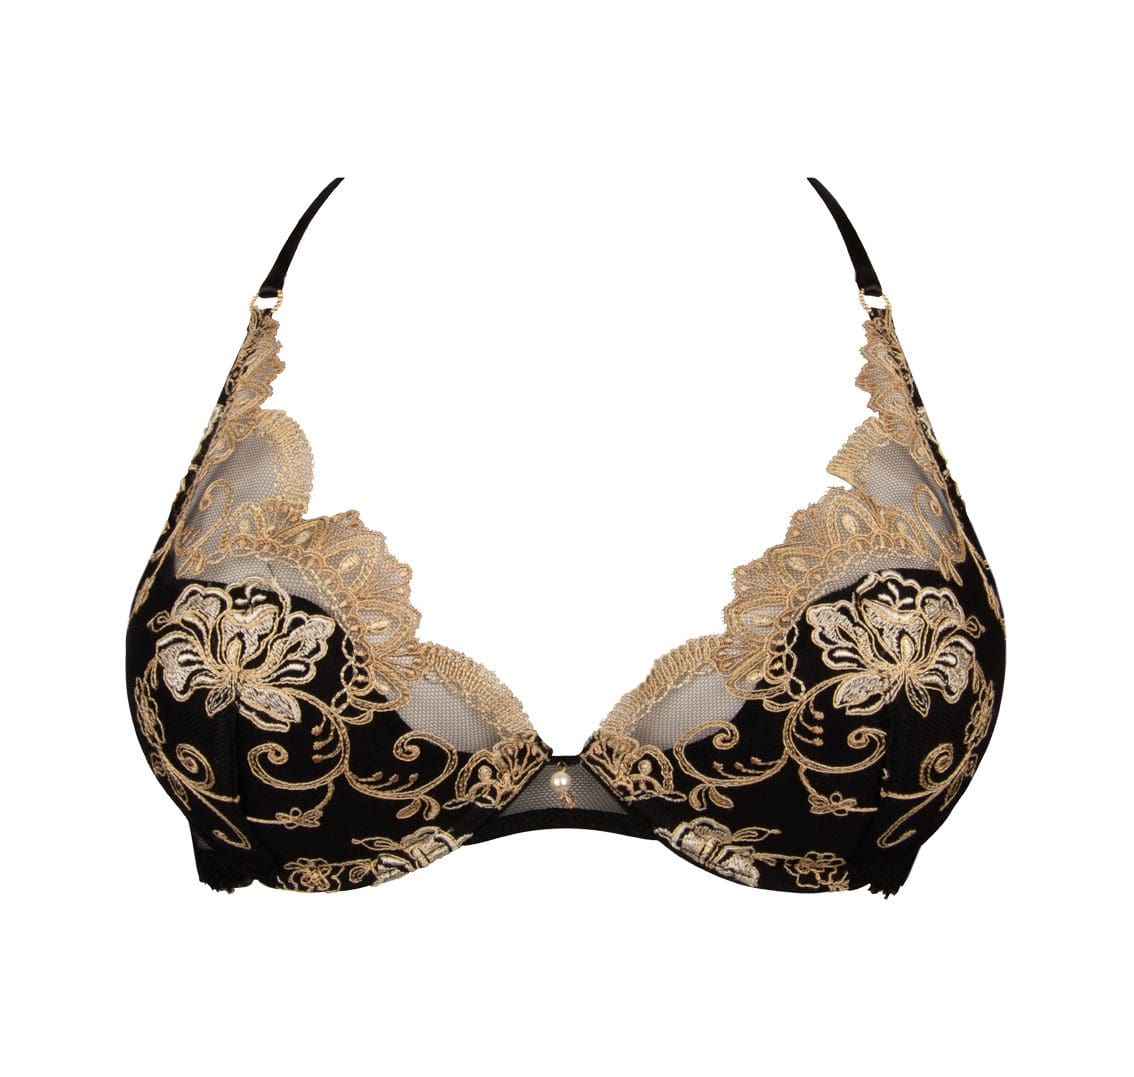 Black Underwire Padded Balconette Bra with Lace Trim - Déesse Collection